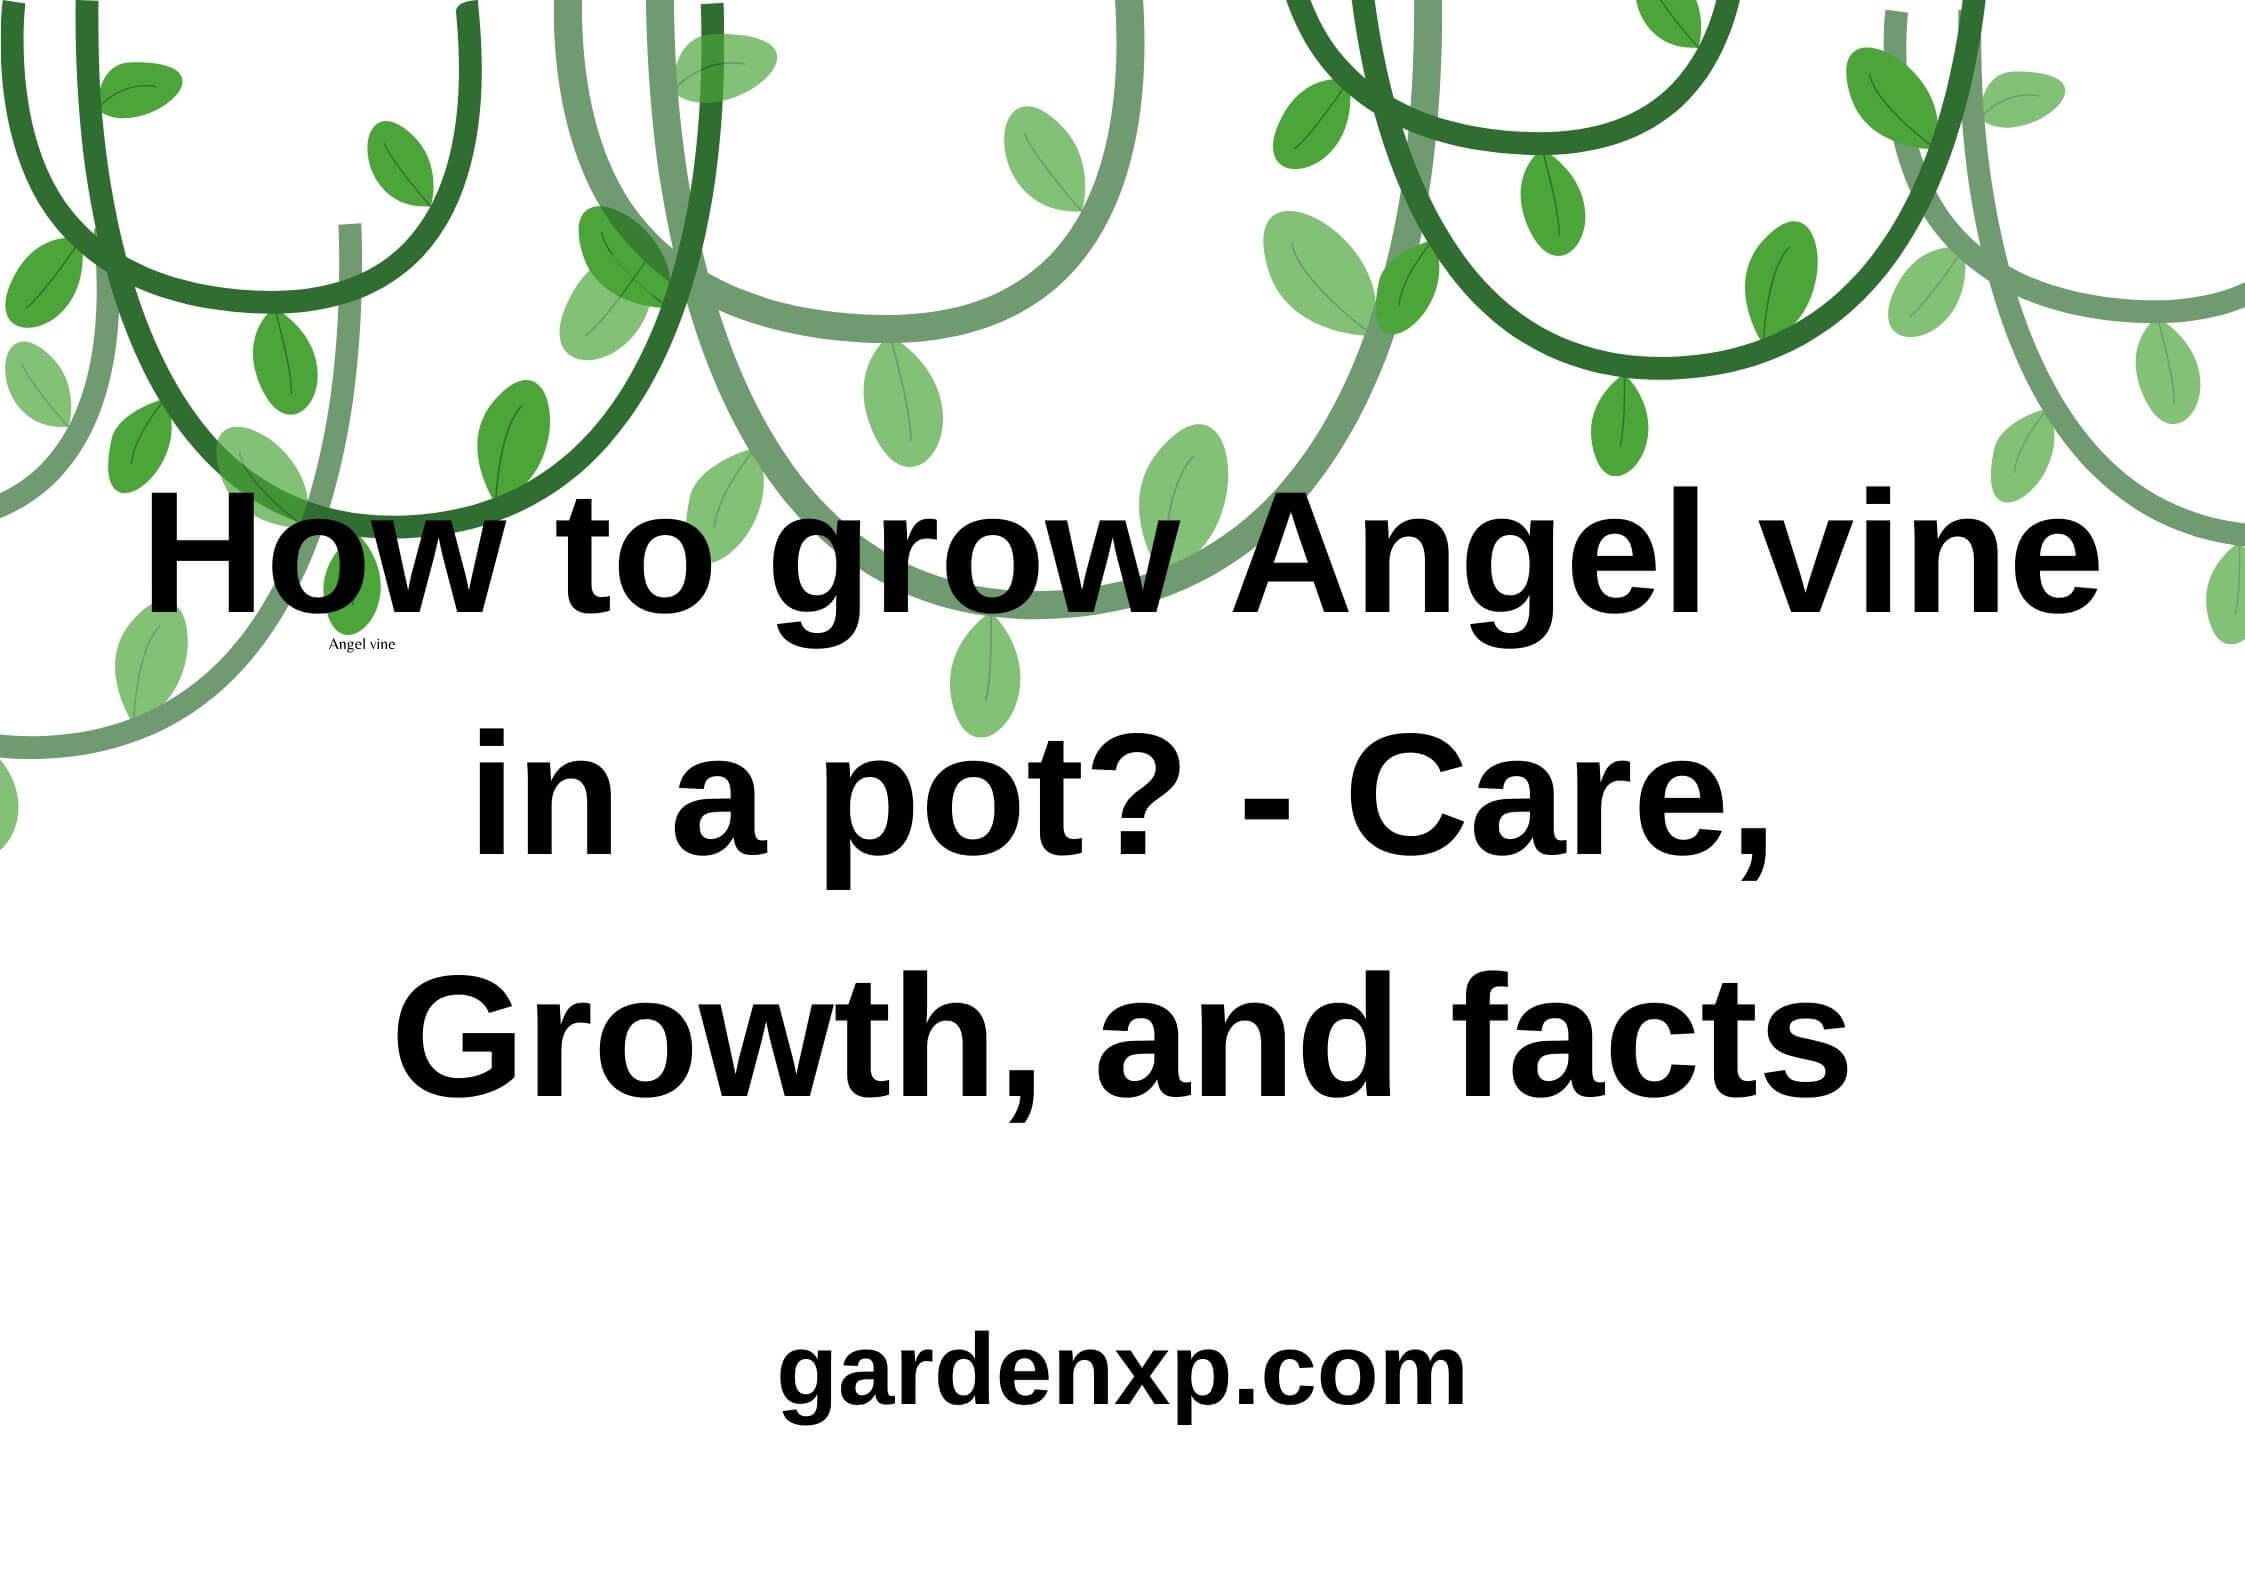 How to grow Angel vine in a pot? - Care, Growth, and facts